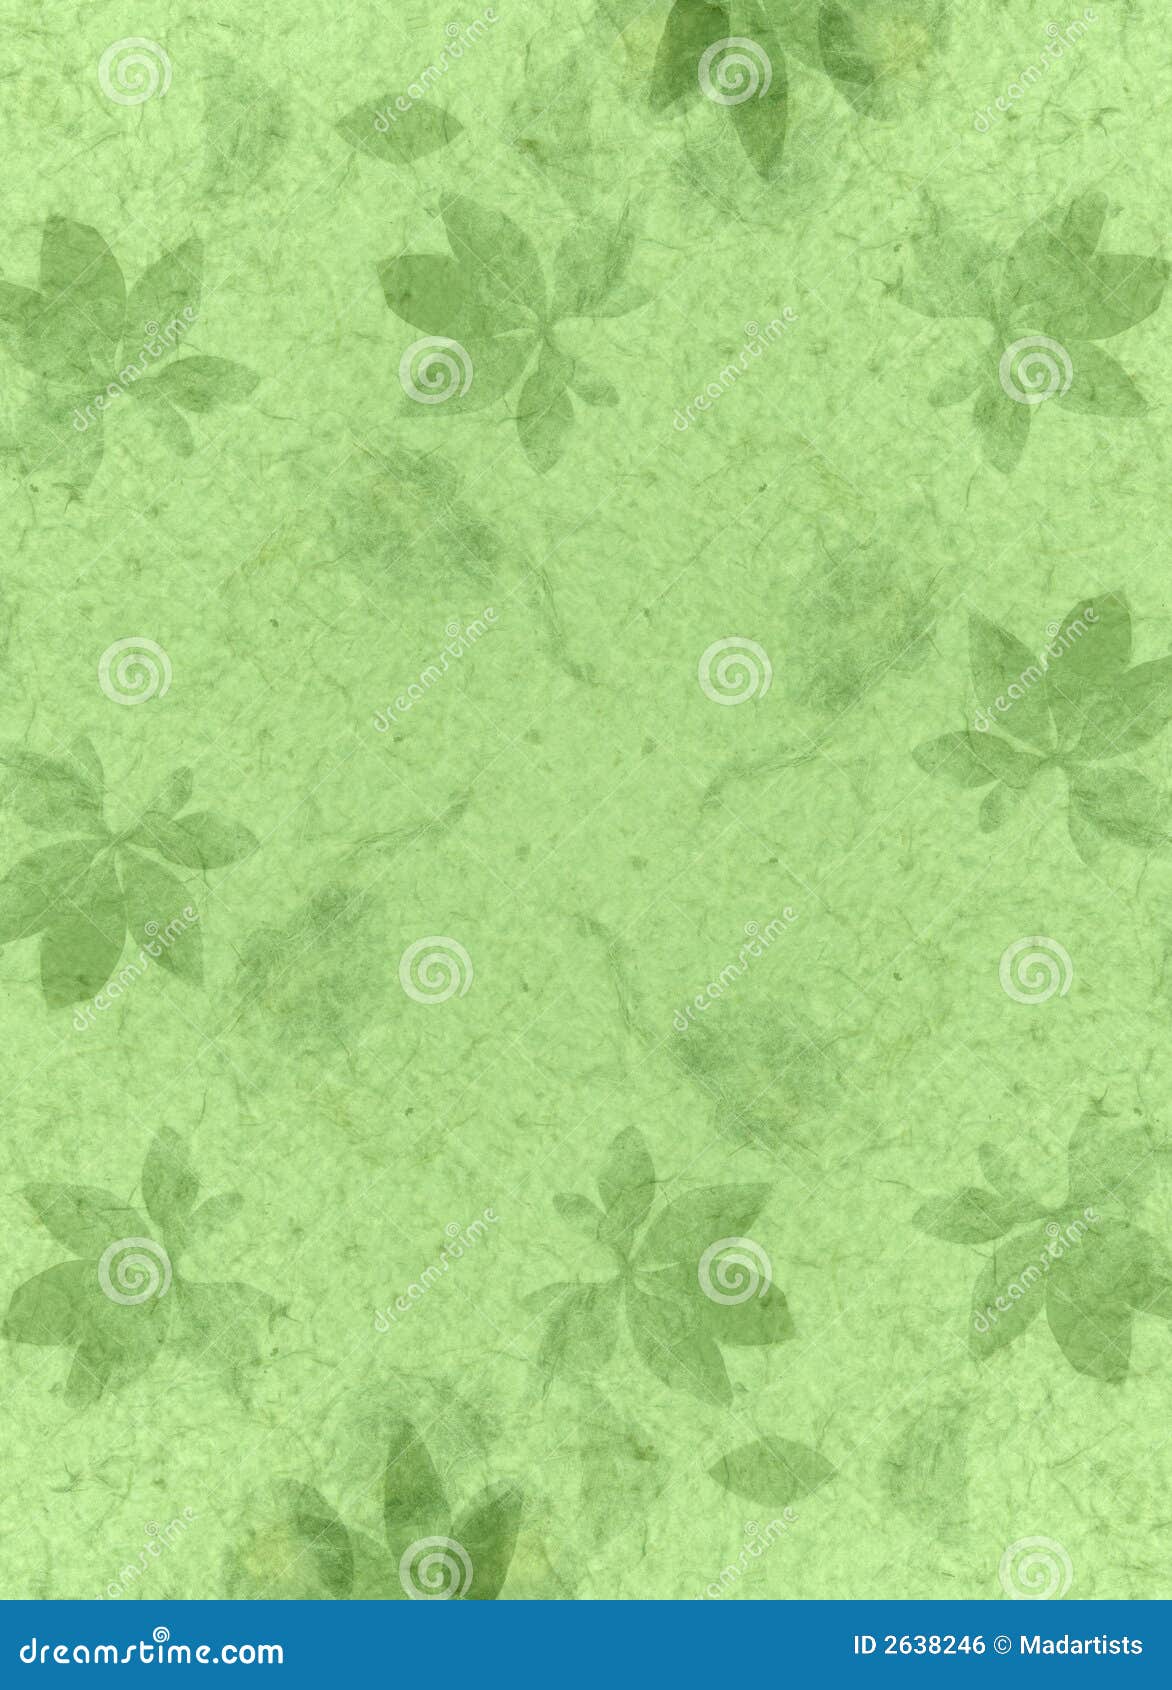 Crumpled Green Paper Texture Picture, Free Photograph